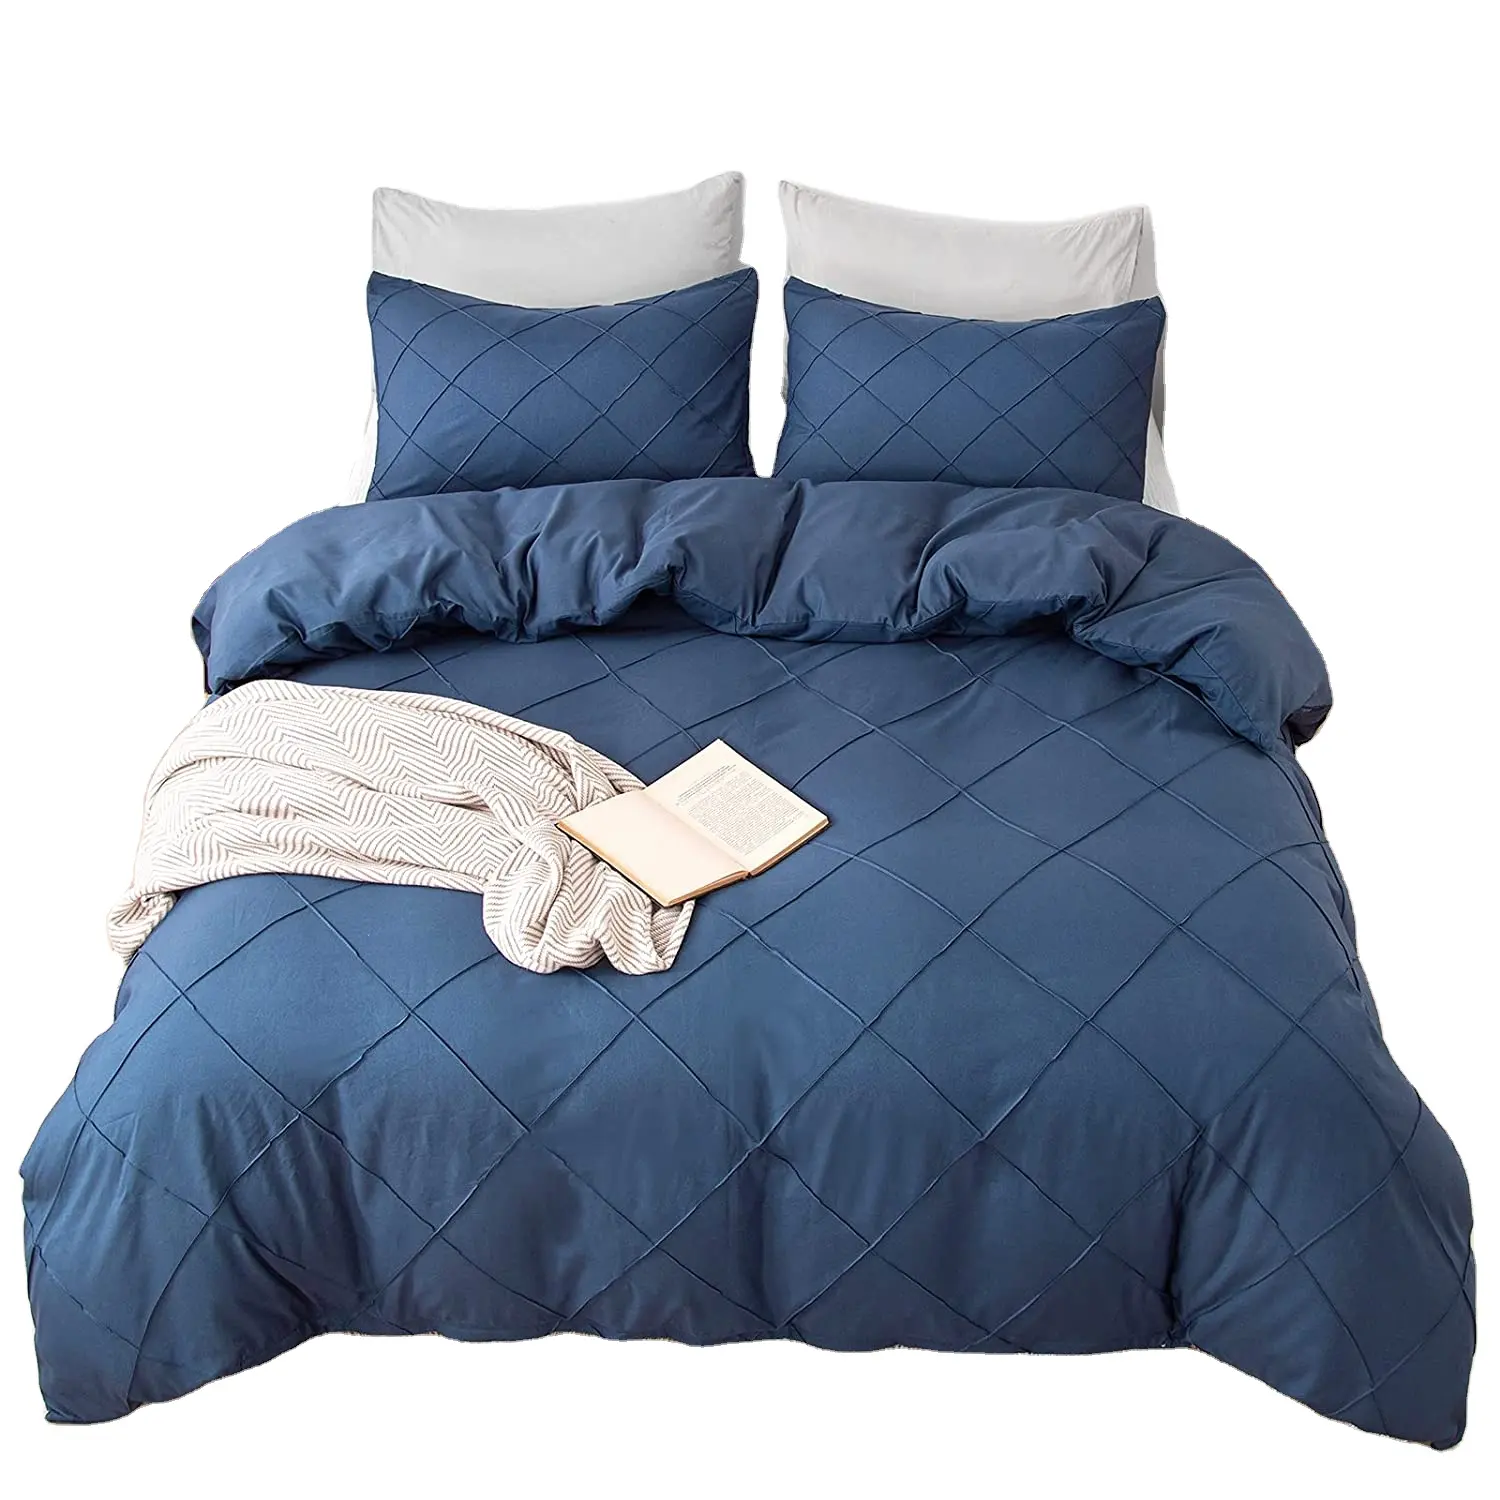 2022 New Arrival Pleat Design Bedding Duvet Cover Set with 2 Pillowcases in Navy Blue Color